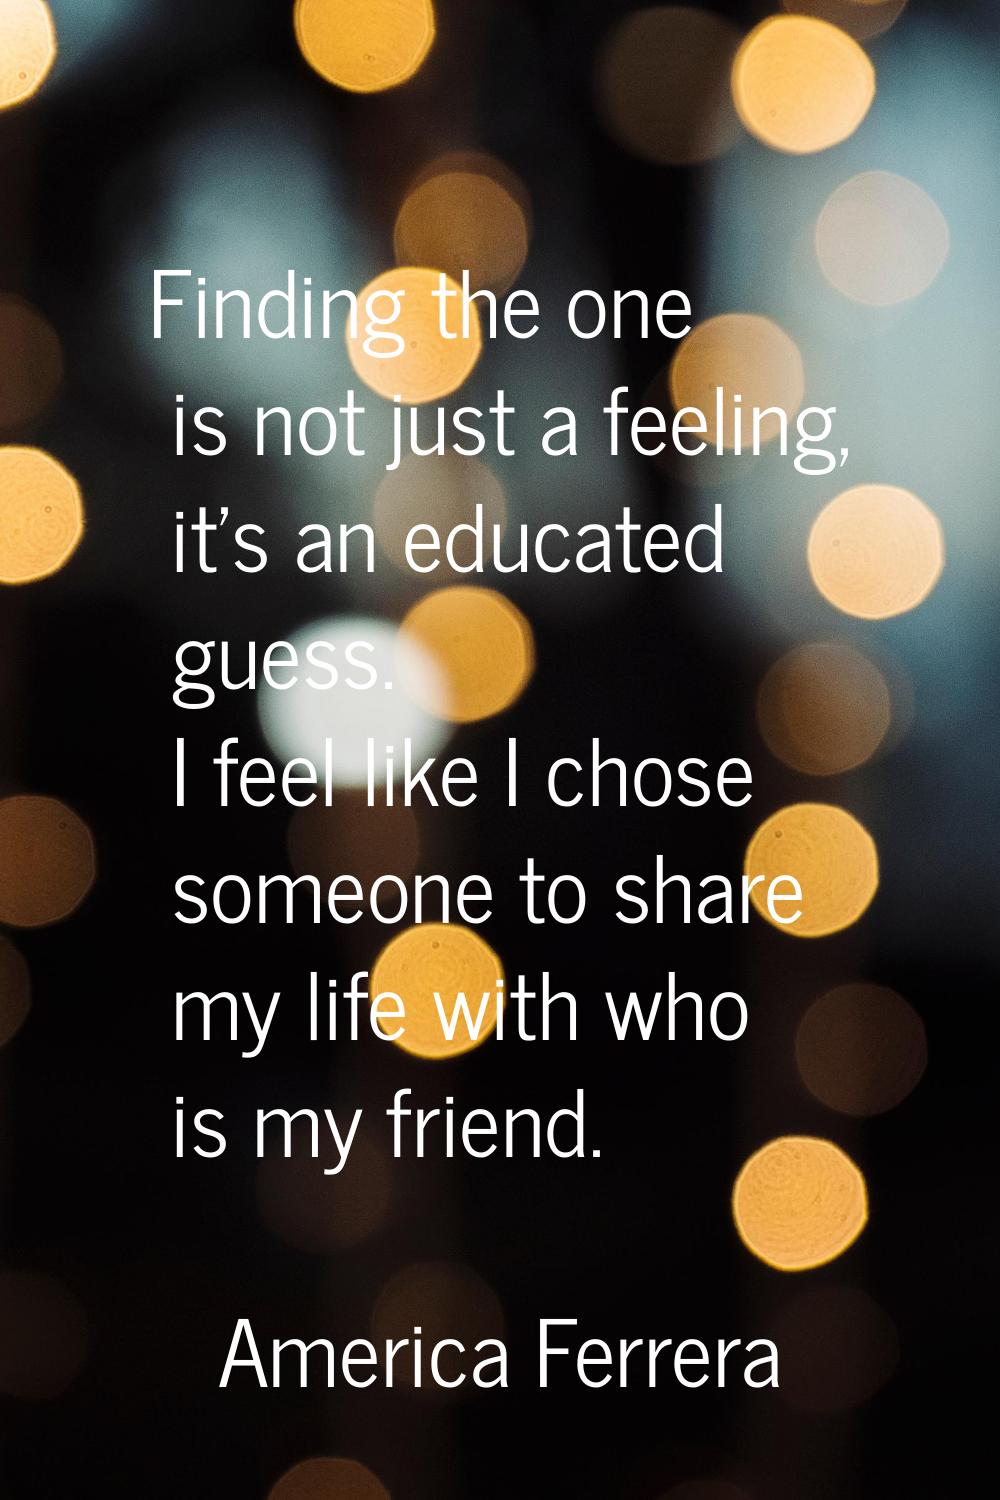 Finding the one is not just a feeling, it's an educated guess. I feel like I chose someone to share